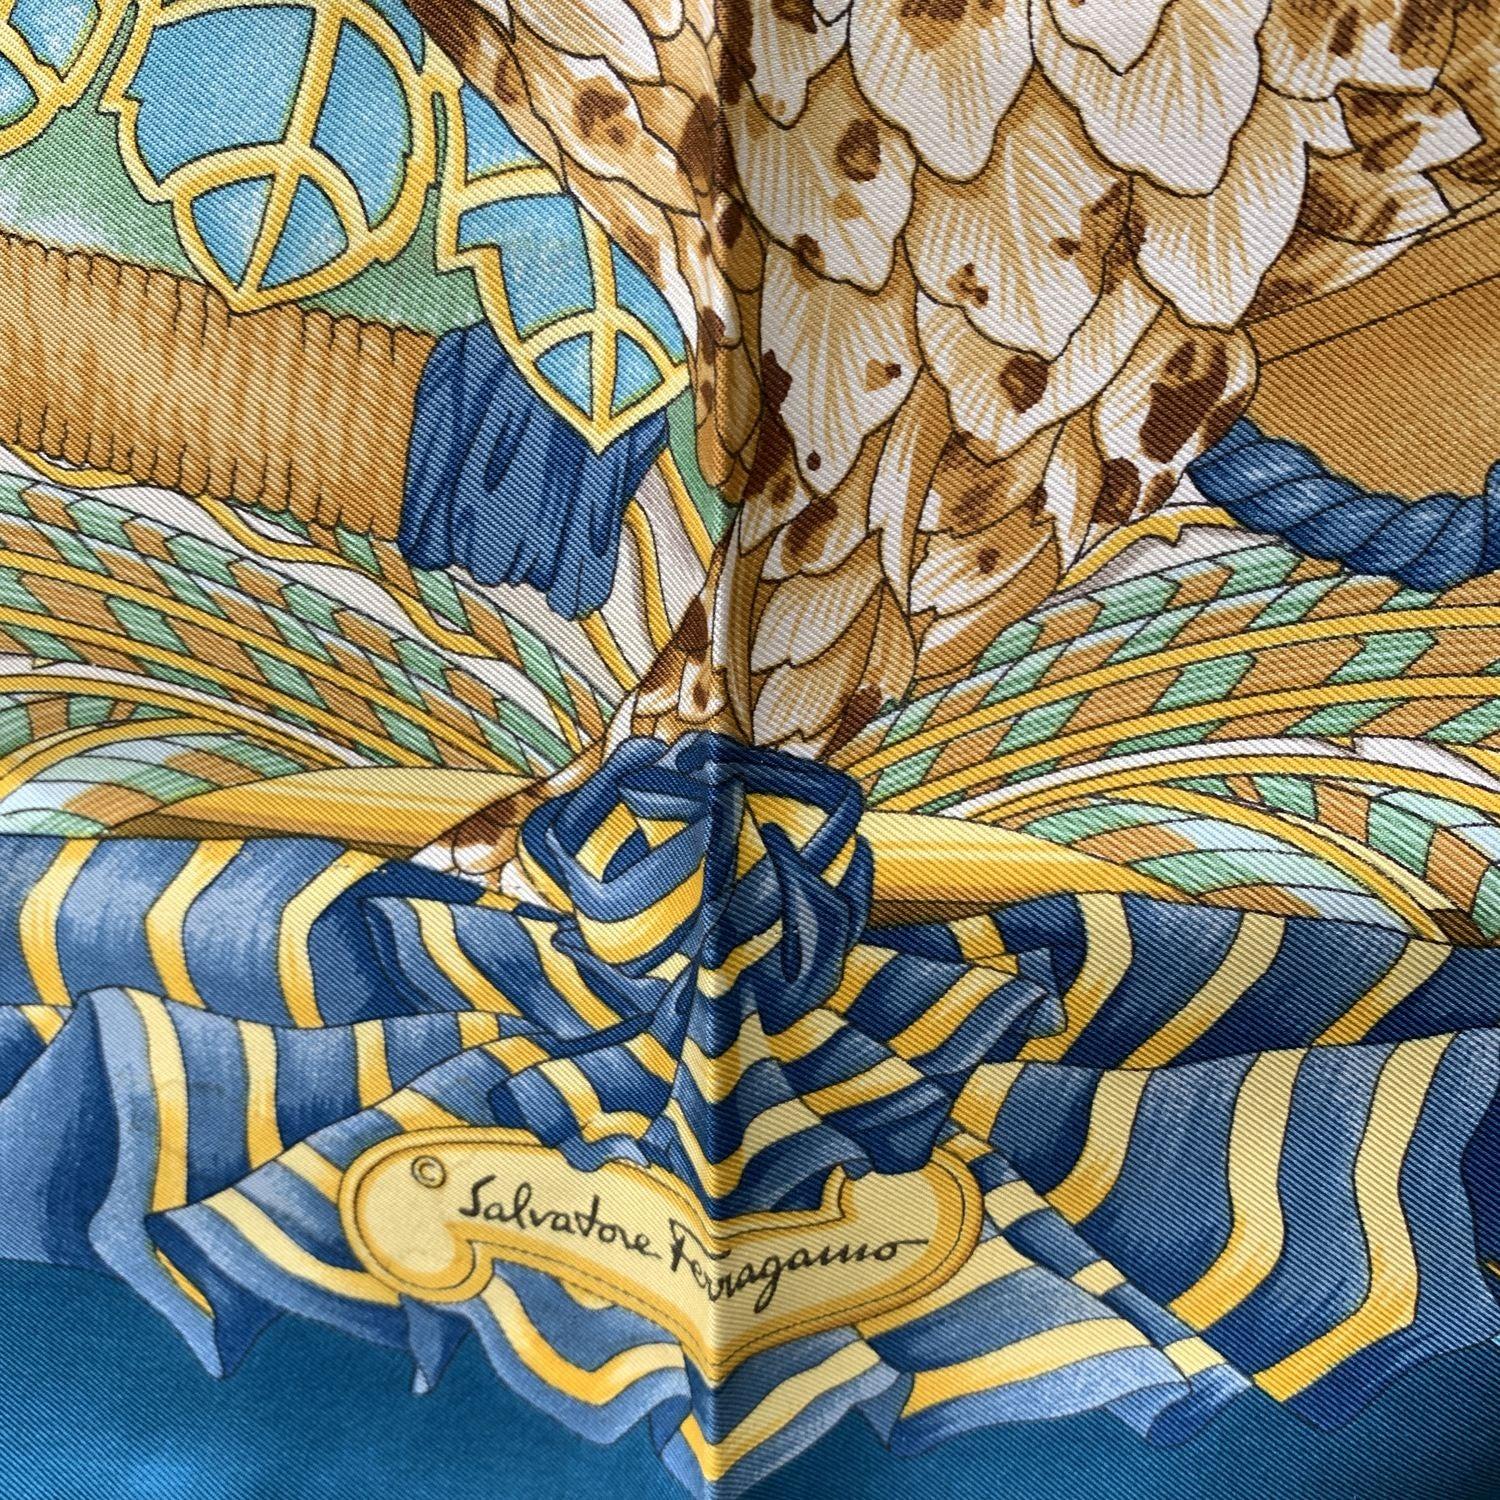 Vintage Salvatore Ferragamo silk scarf. Birds print. Hand rolled edges. Made in Italy. Composition: 100% silk. Measurements: 34.5 x 34.5 inches - 87.5 x 87.5 cm. 'Salvatore Ferragamo' signature printed on the scarf Details MATERIAL: Silk COLOR: